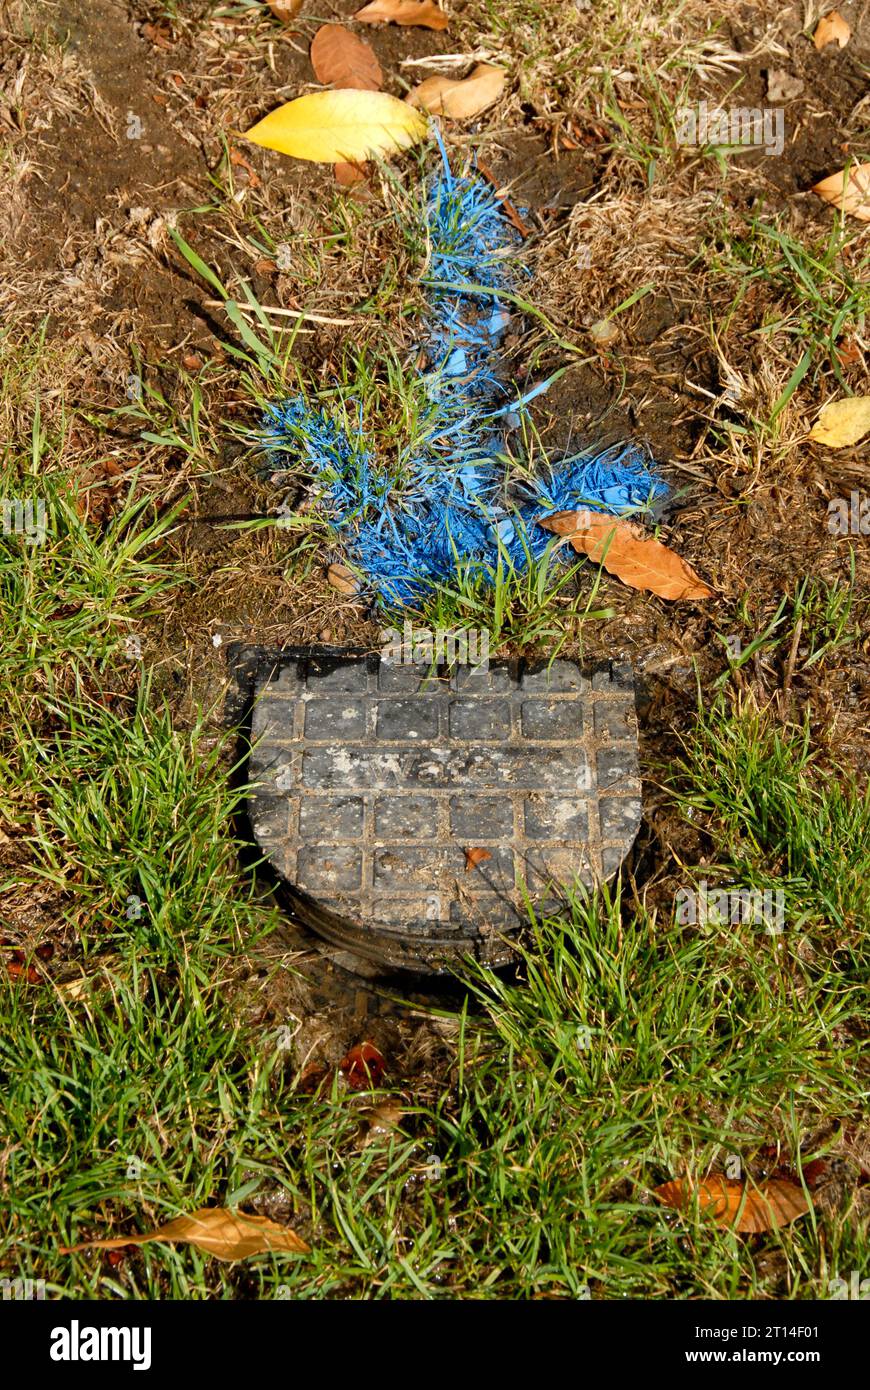 Bold blue arrow painted on grass pointing to leaking water meter that needs replacing, after survey and before repairs start Stock Photo